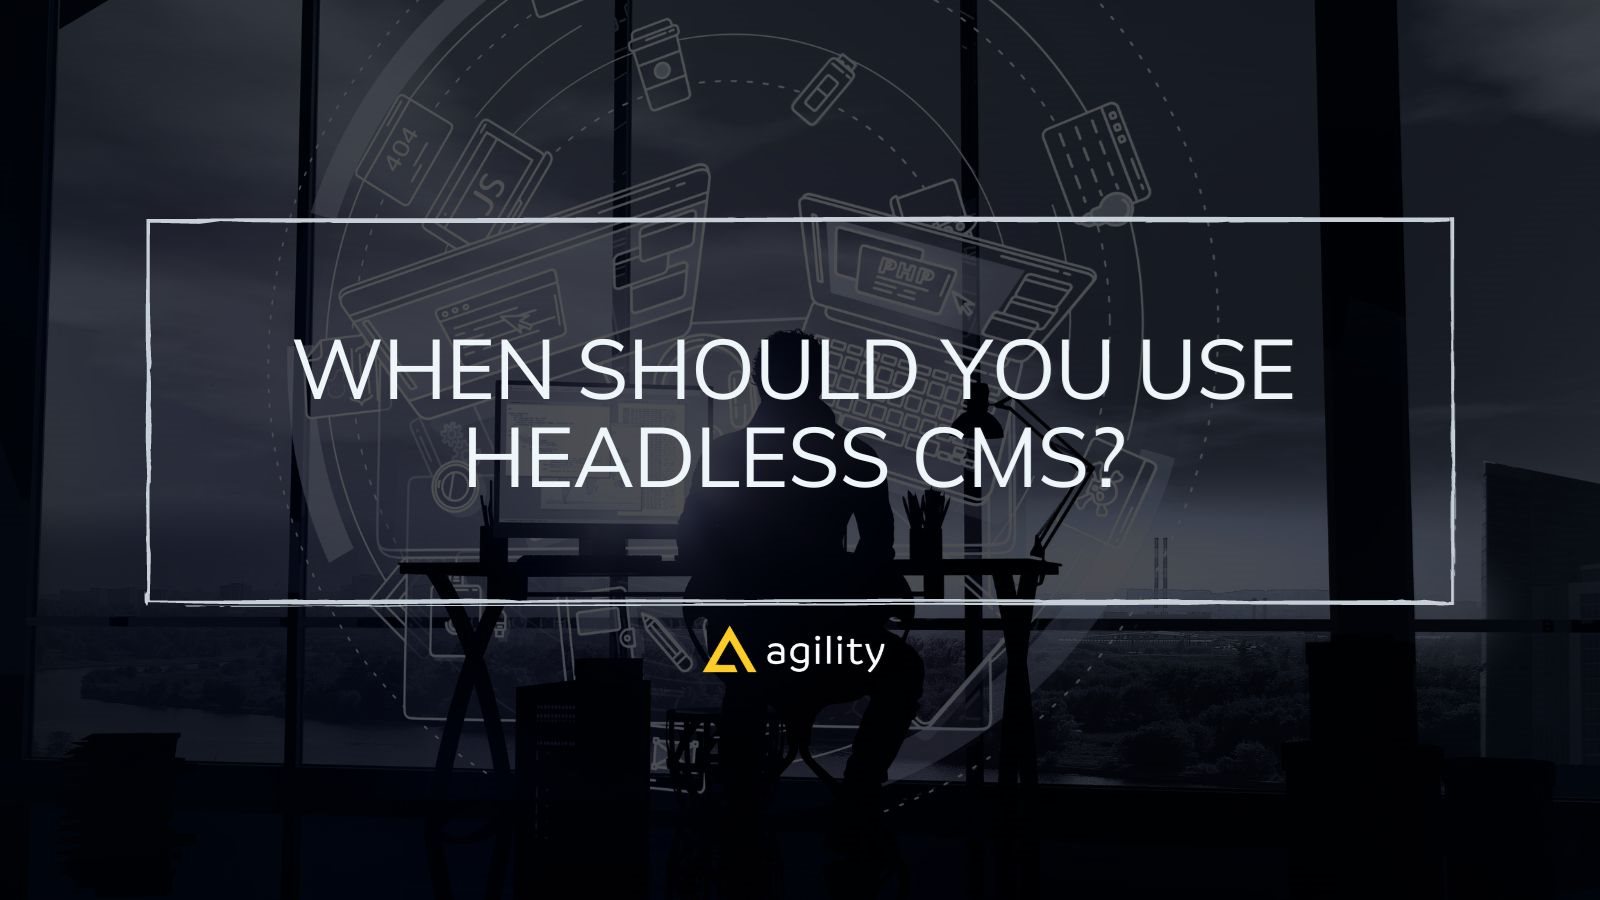 When Should You Use Headless CMS?